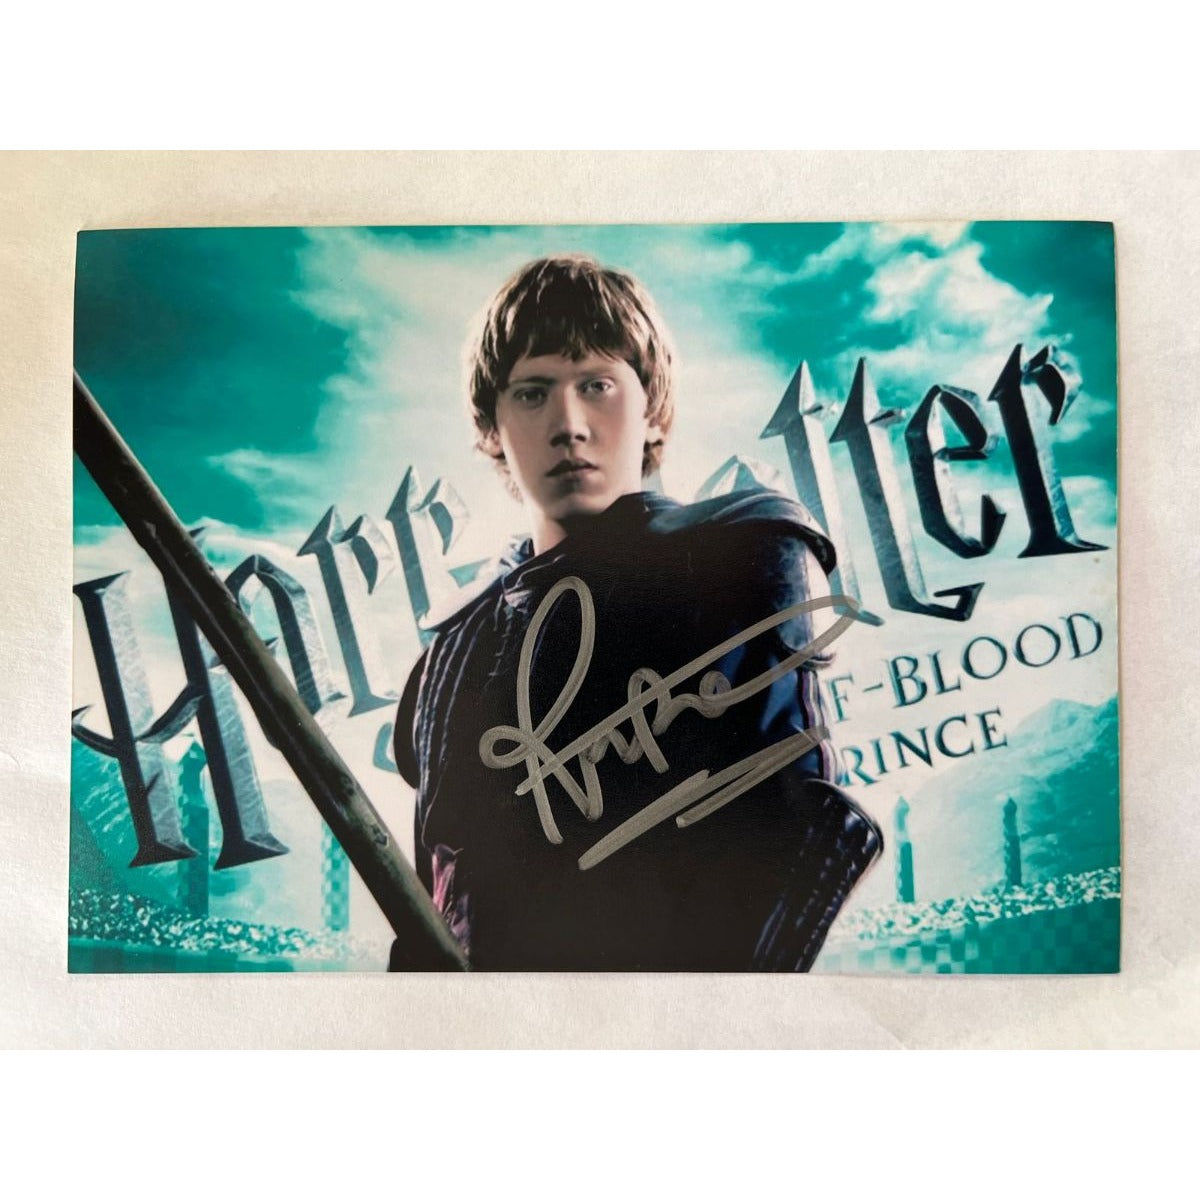 Harry Potter Rupert Grint 5x7 photo signed with proof